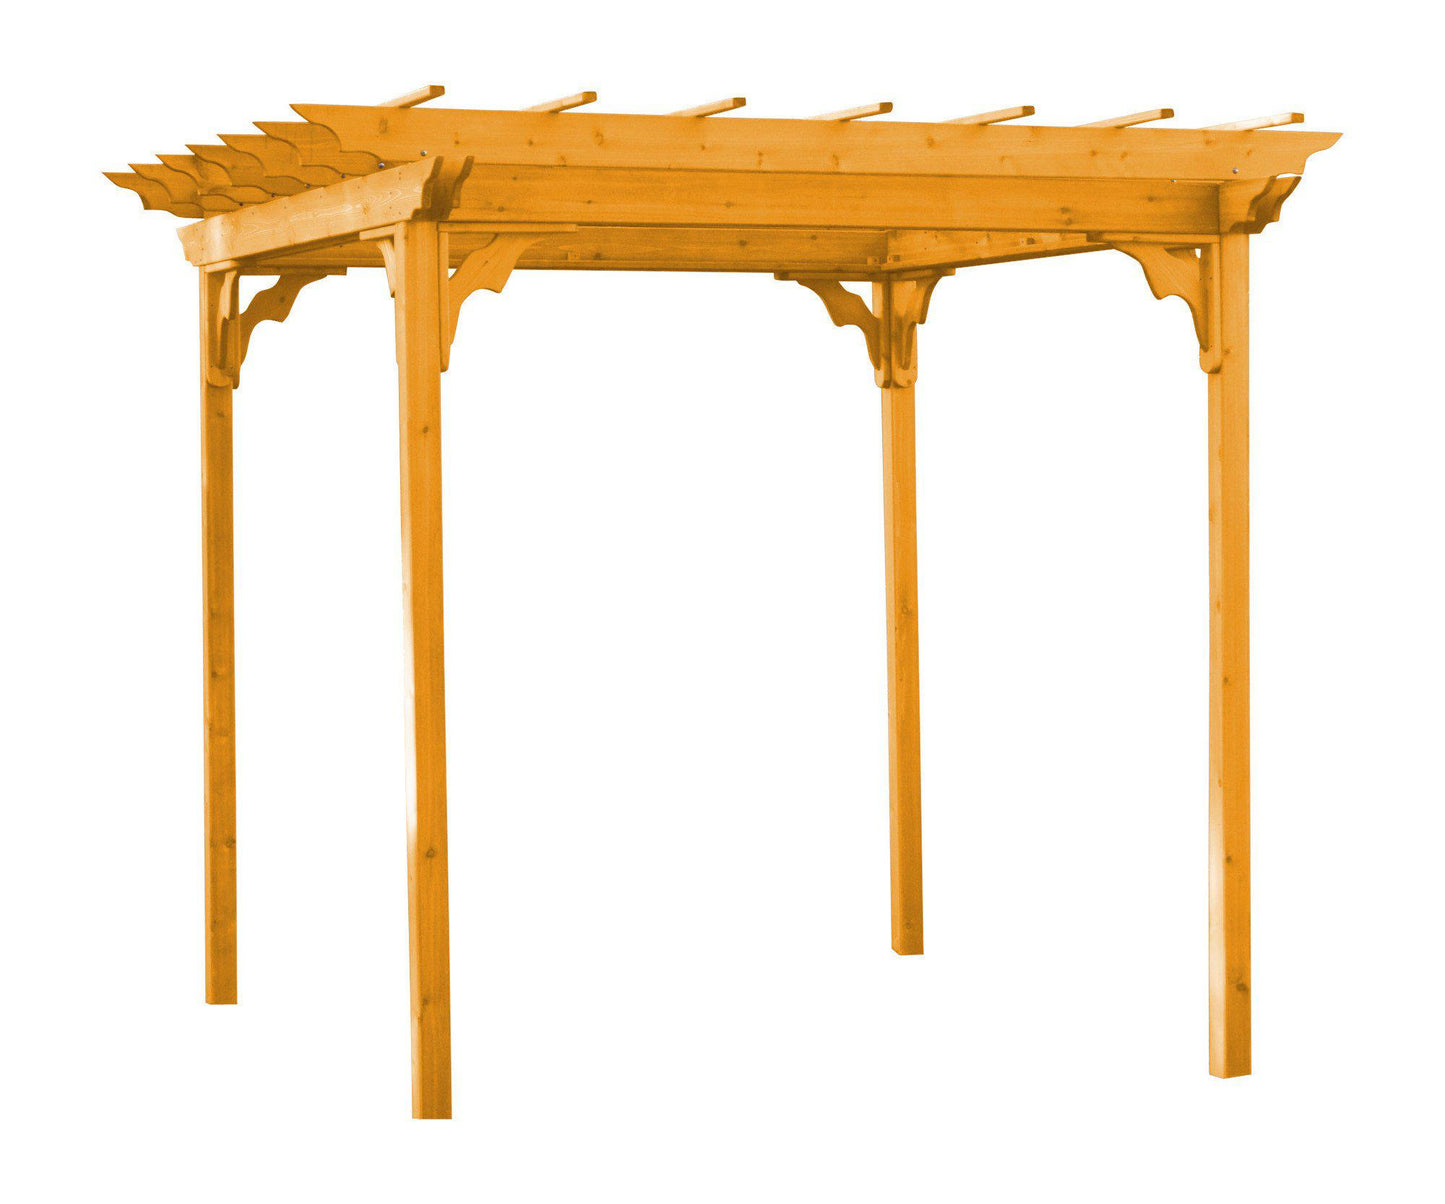 A&L FURNITURE CO. Western Red Cedar 8' x 10' Pergola W/ Swing Hangers - LEAD TIME TO SHIP 4 WEEKS OR LESS